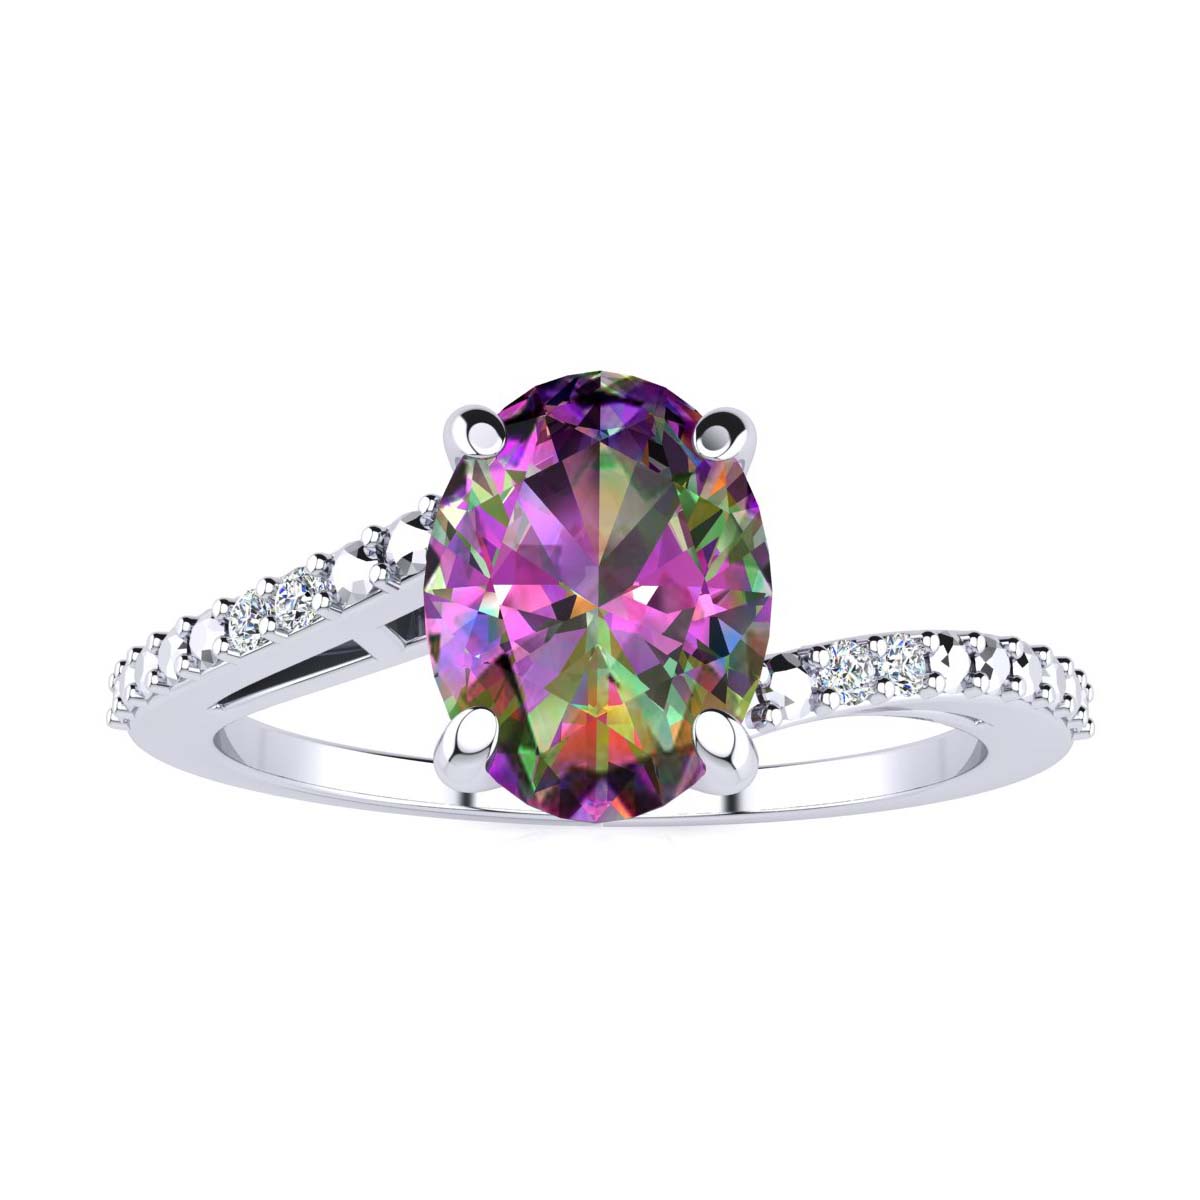 Turkish Reversible Oval Amethyst and Black Onyx Topaz 925 Sterling Silver Ring 